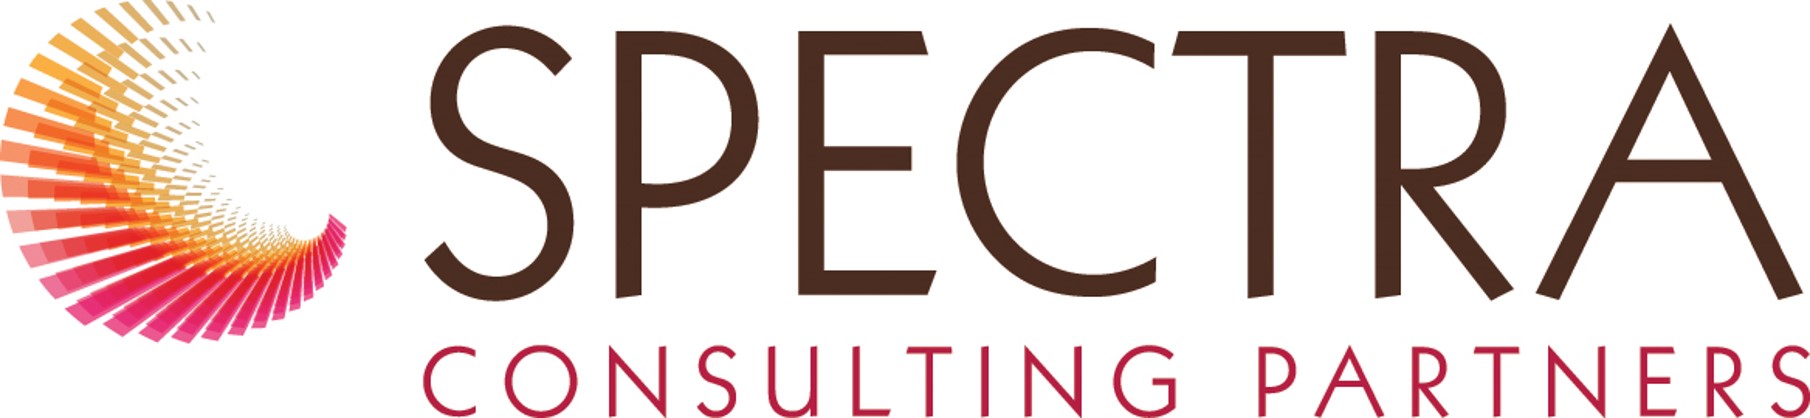 Spectra Consulting Partners